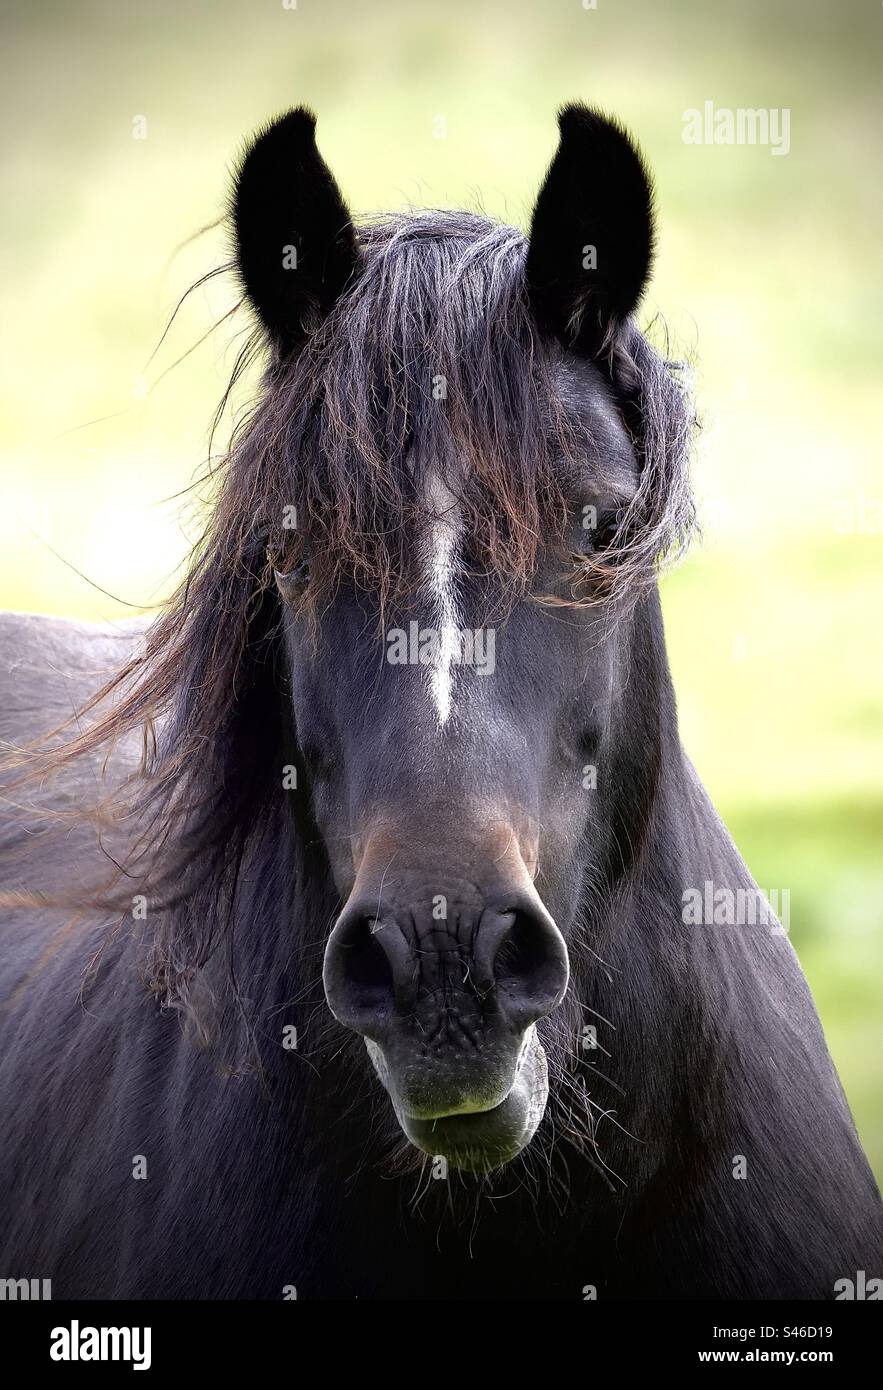 Horse Hair Photos and Images